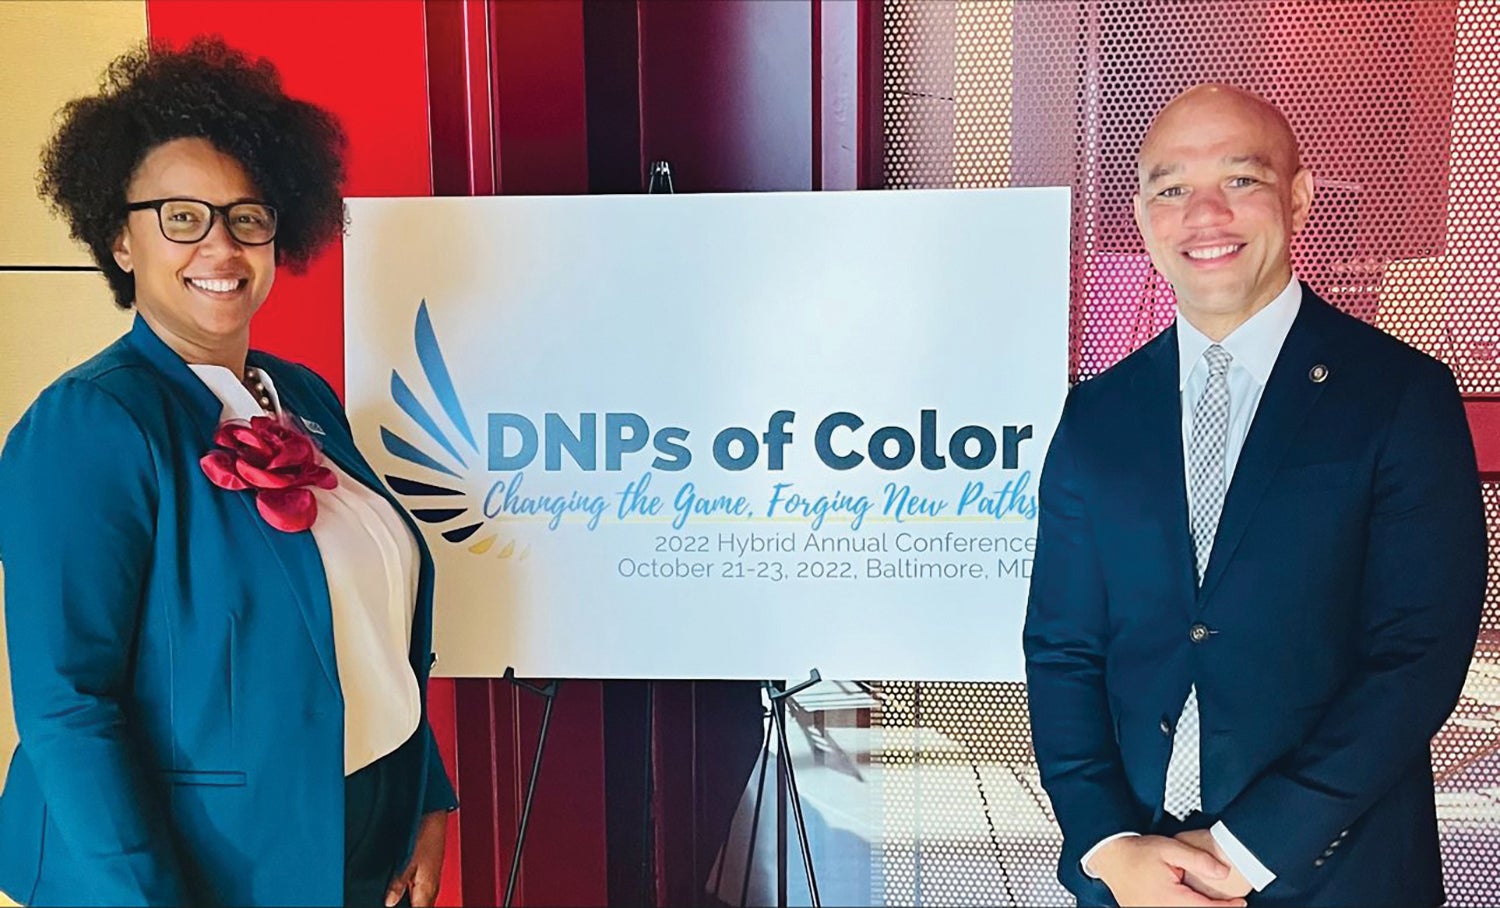 two people stand in front of a sign that says "DNPs of Color"